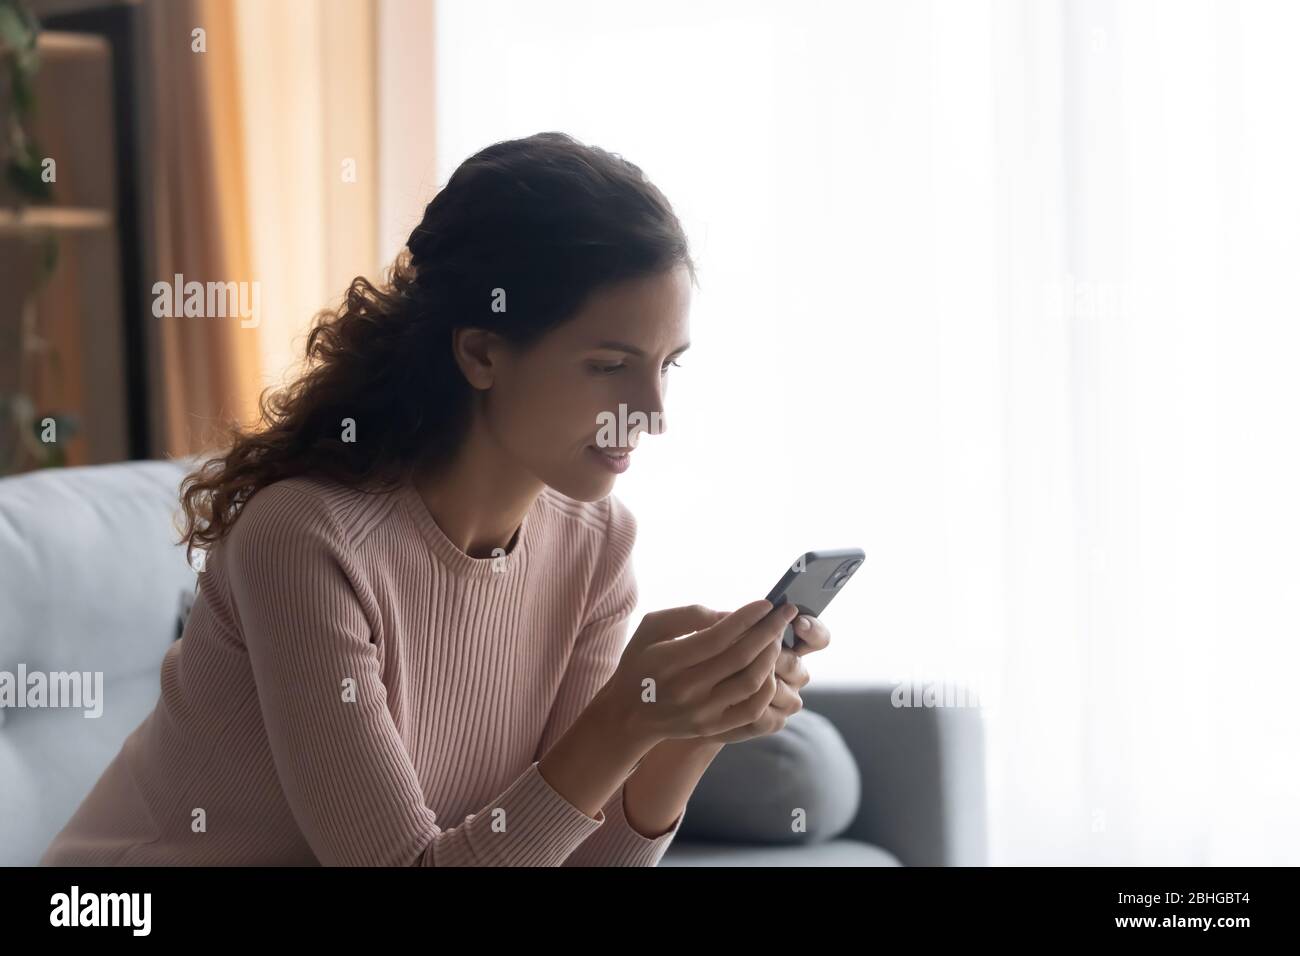 Pretty young woman involved in pleasant conversation online. Stock Photo